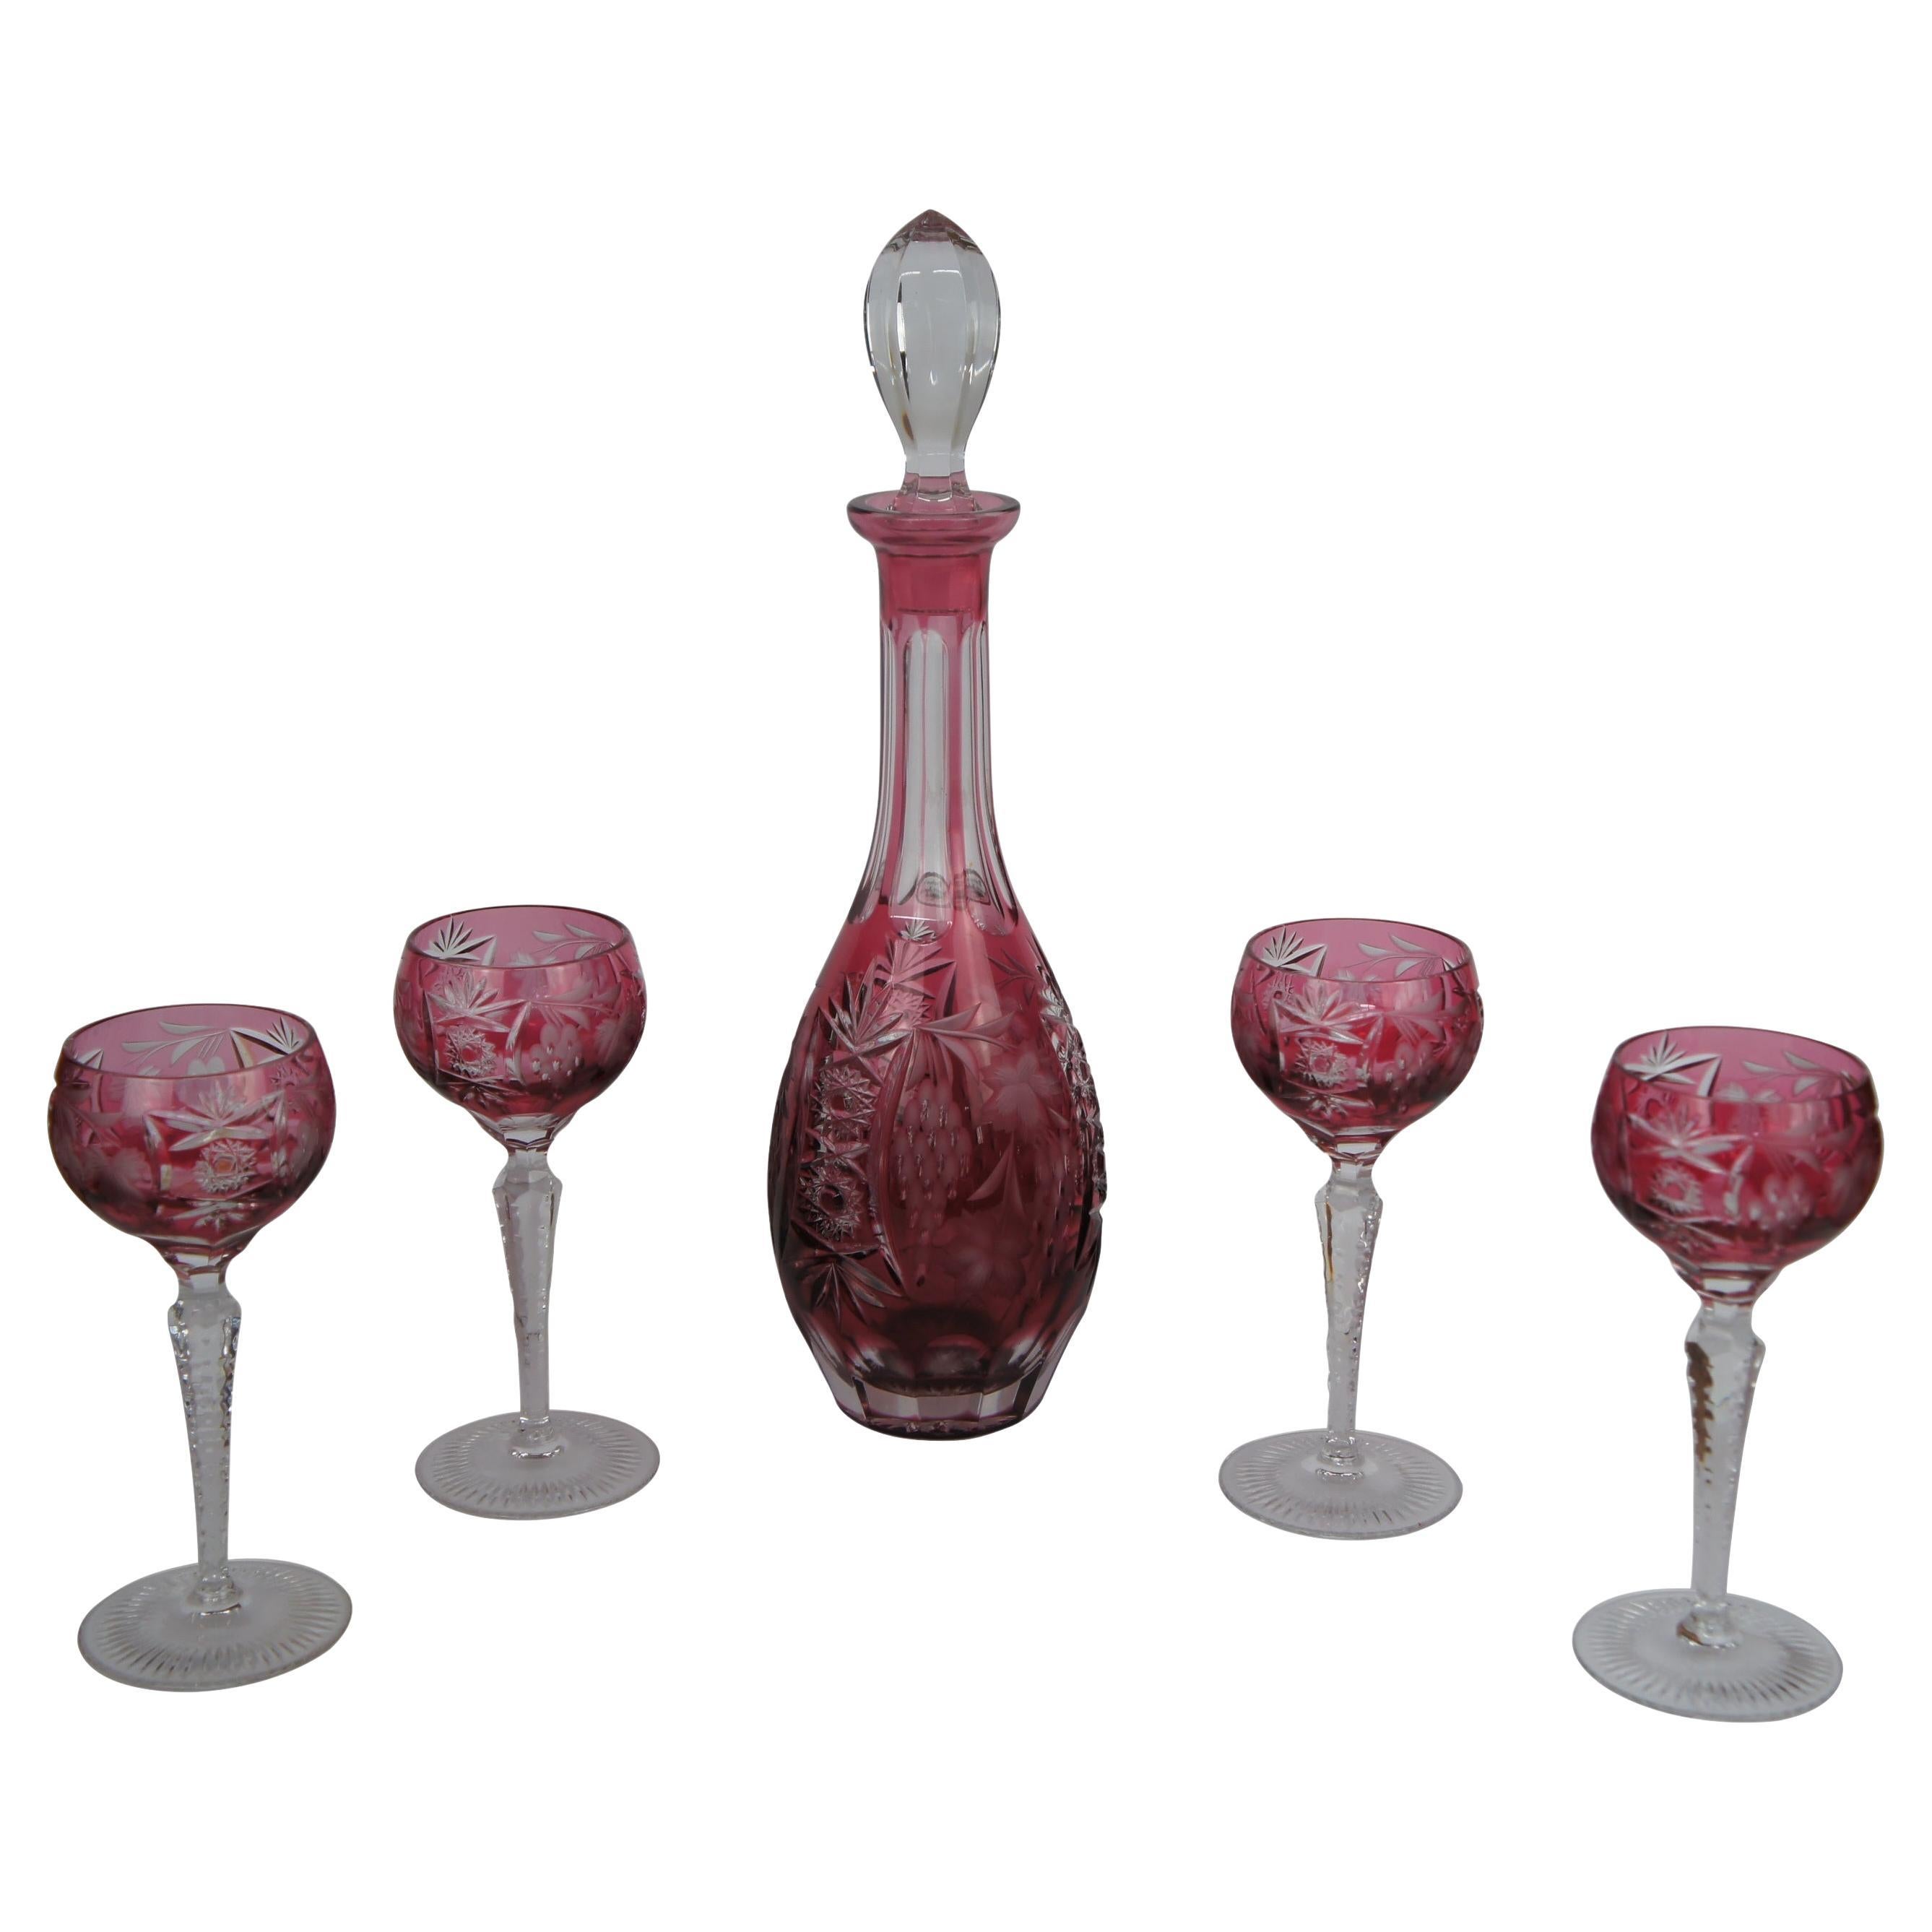 Nachtmann Traube Bohemian Cranberry Cut Clear Crystal Decanter & Shot Glasses For Sale